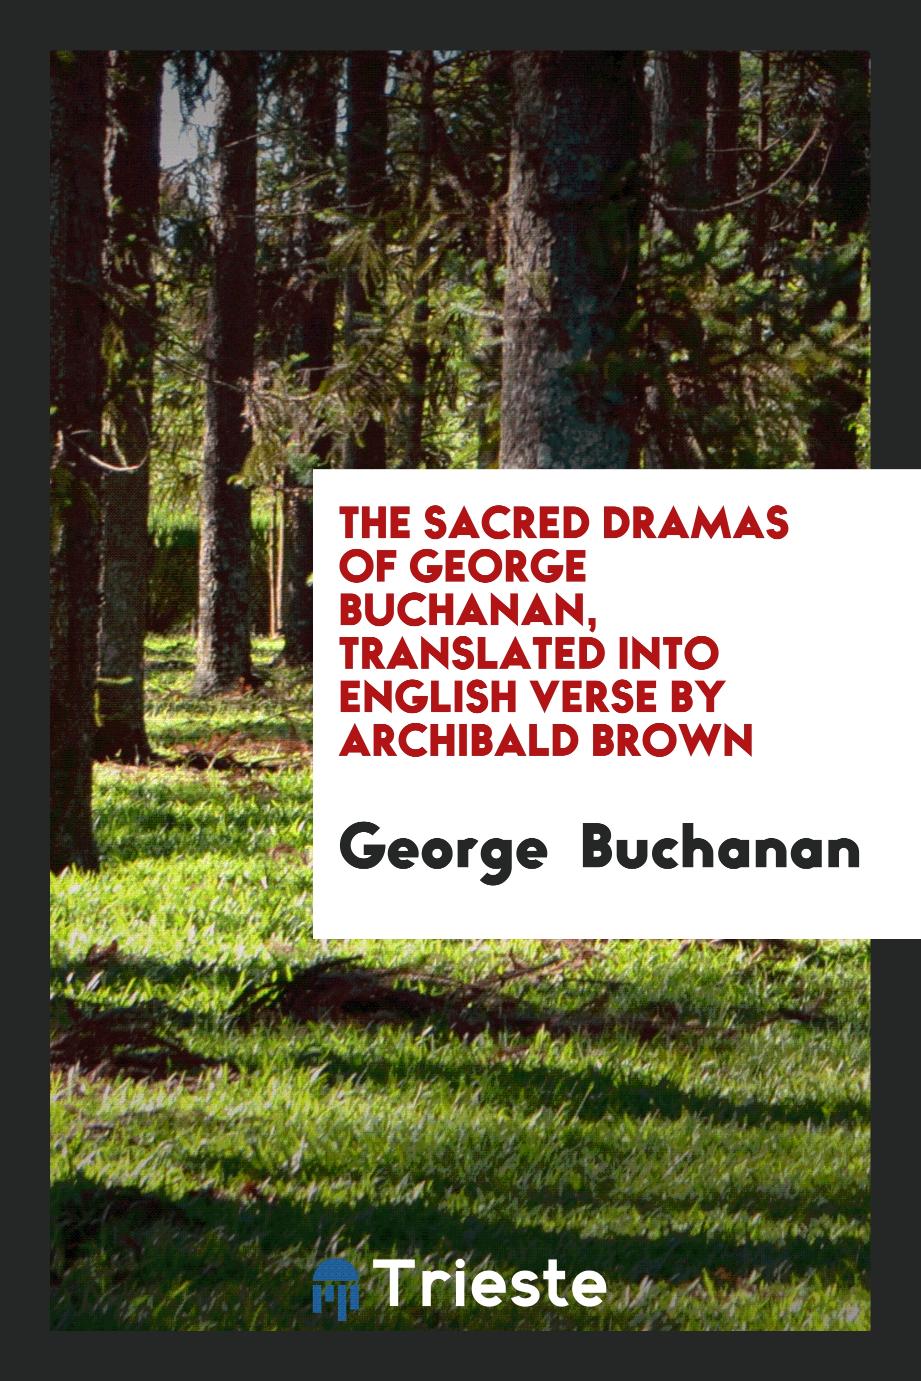 The Sacred Dramas of George Buchanan, Translated into English Verse by Archibald Brown